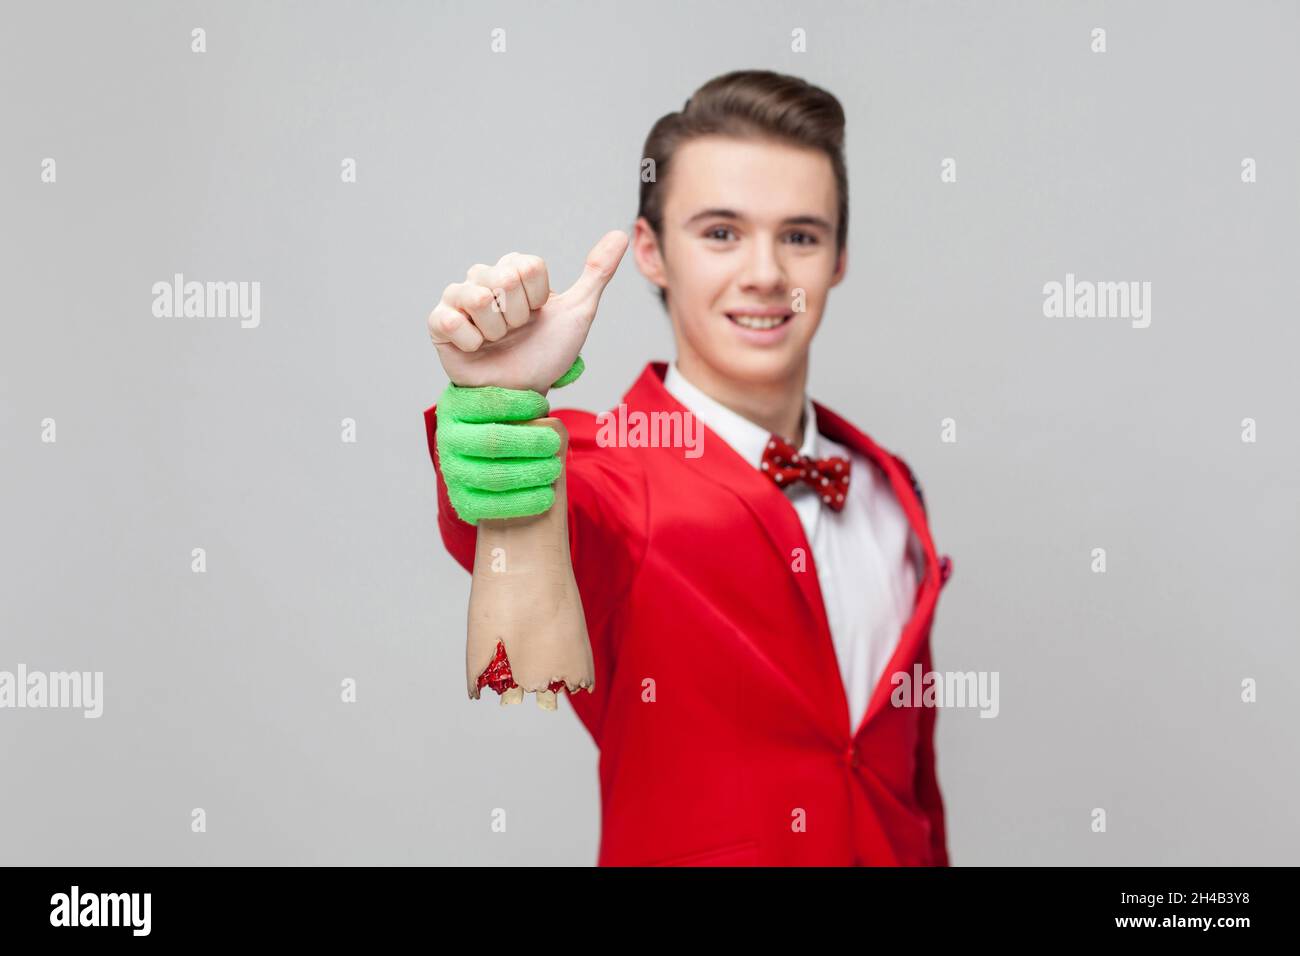 Portrait of cheerful gentleman with stylish hairdo in red tuxedo and bow tie smiling at camera and holding zombie hand showing thumbs up, like gesture. indoor studio shot isolated on gray background Stock Photo